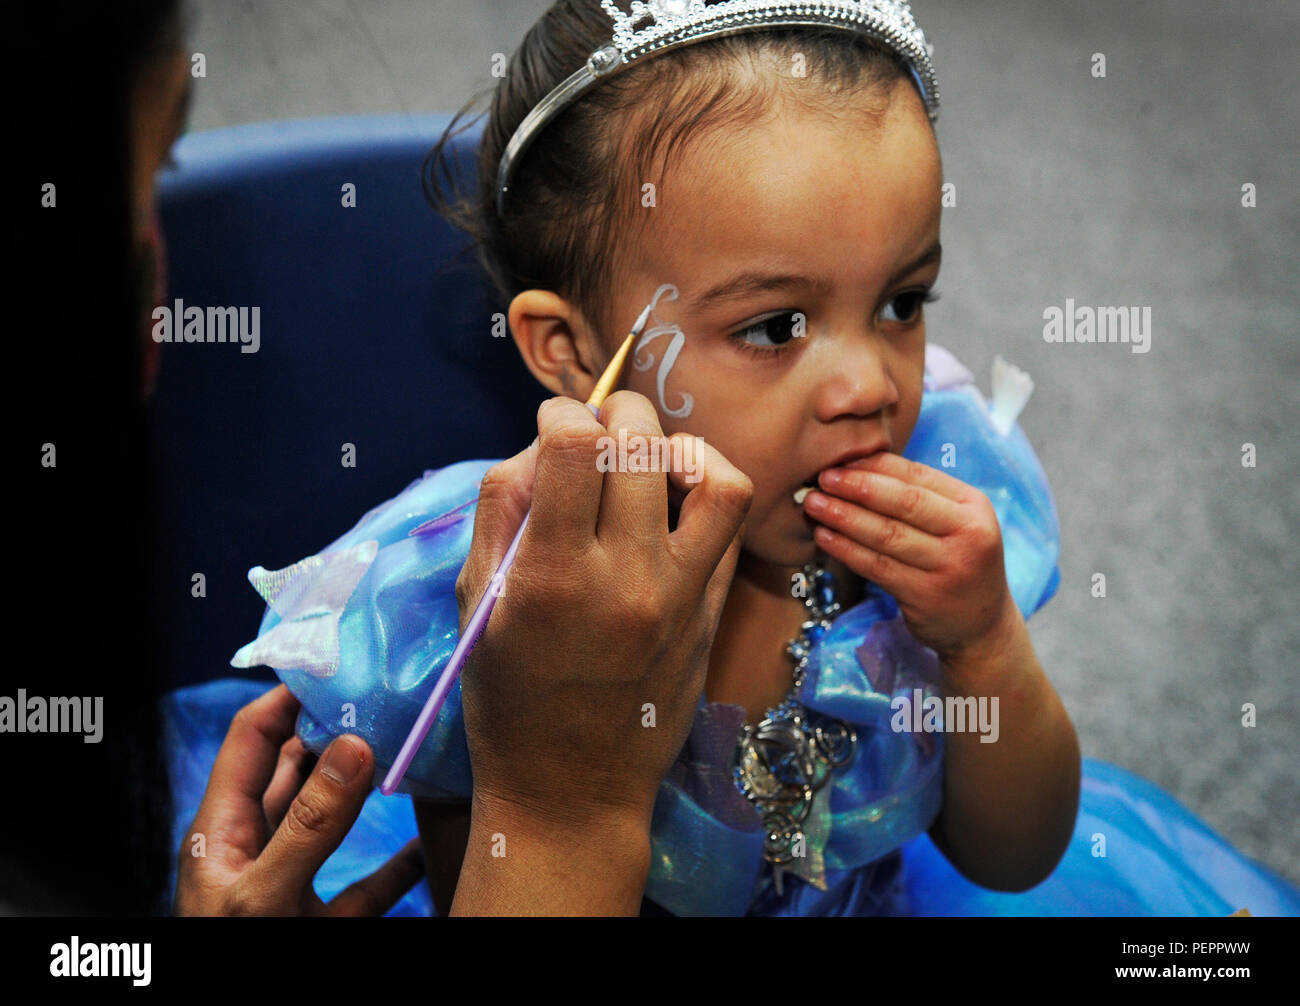 A volunteer paints a child’s face during a Kinder Fasching celebration Jan. 25, 2016, at Ramstein Air Base, Germany. Fasching is Germany’s carnival season and is a time of festivity. The main fasching parades take place on Carnival Sunday and Rose Monday, Feb. 7 and 8. (U.S. Air Force photo/Airman 1st Class Larissa Greatwood) Stock Photo